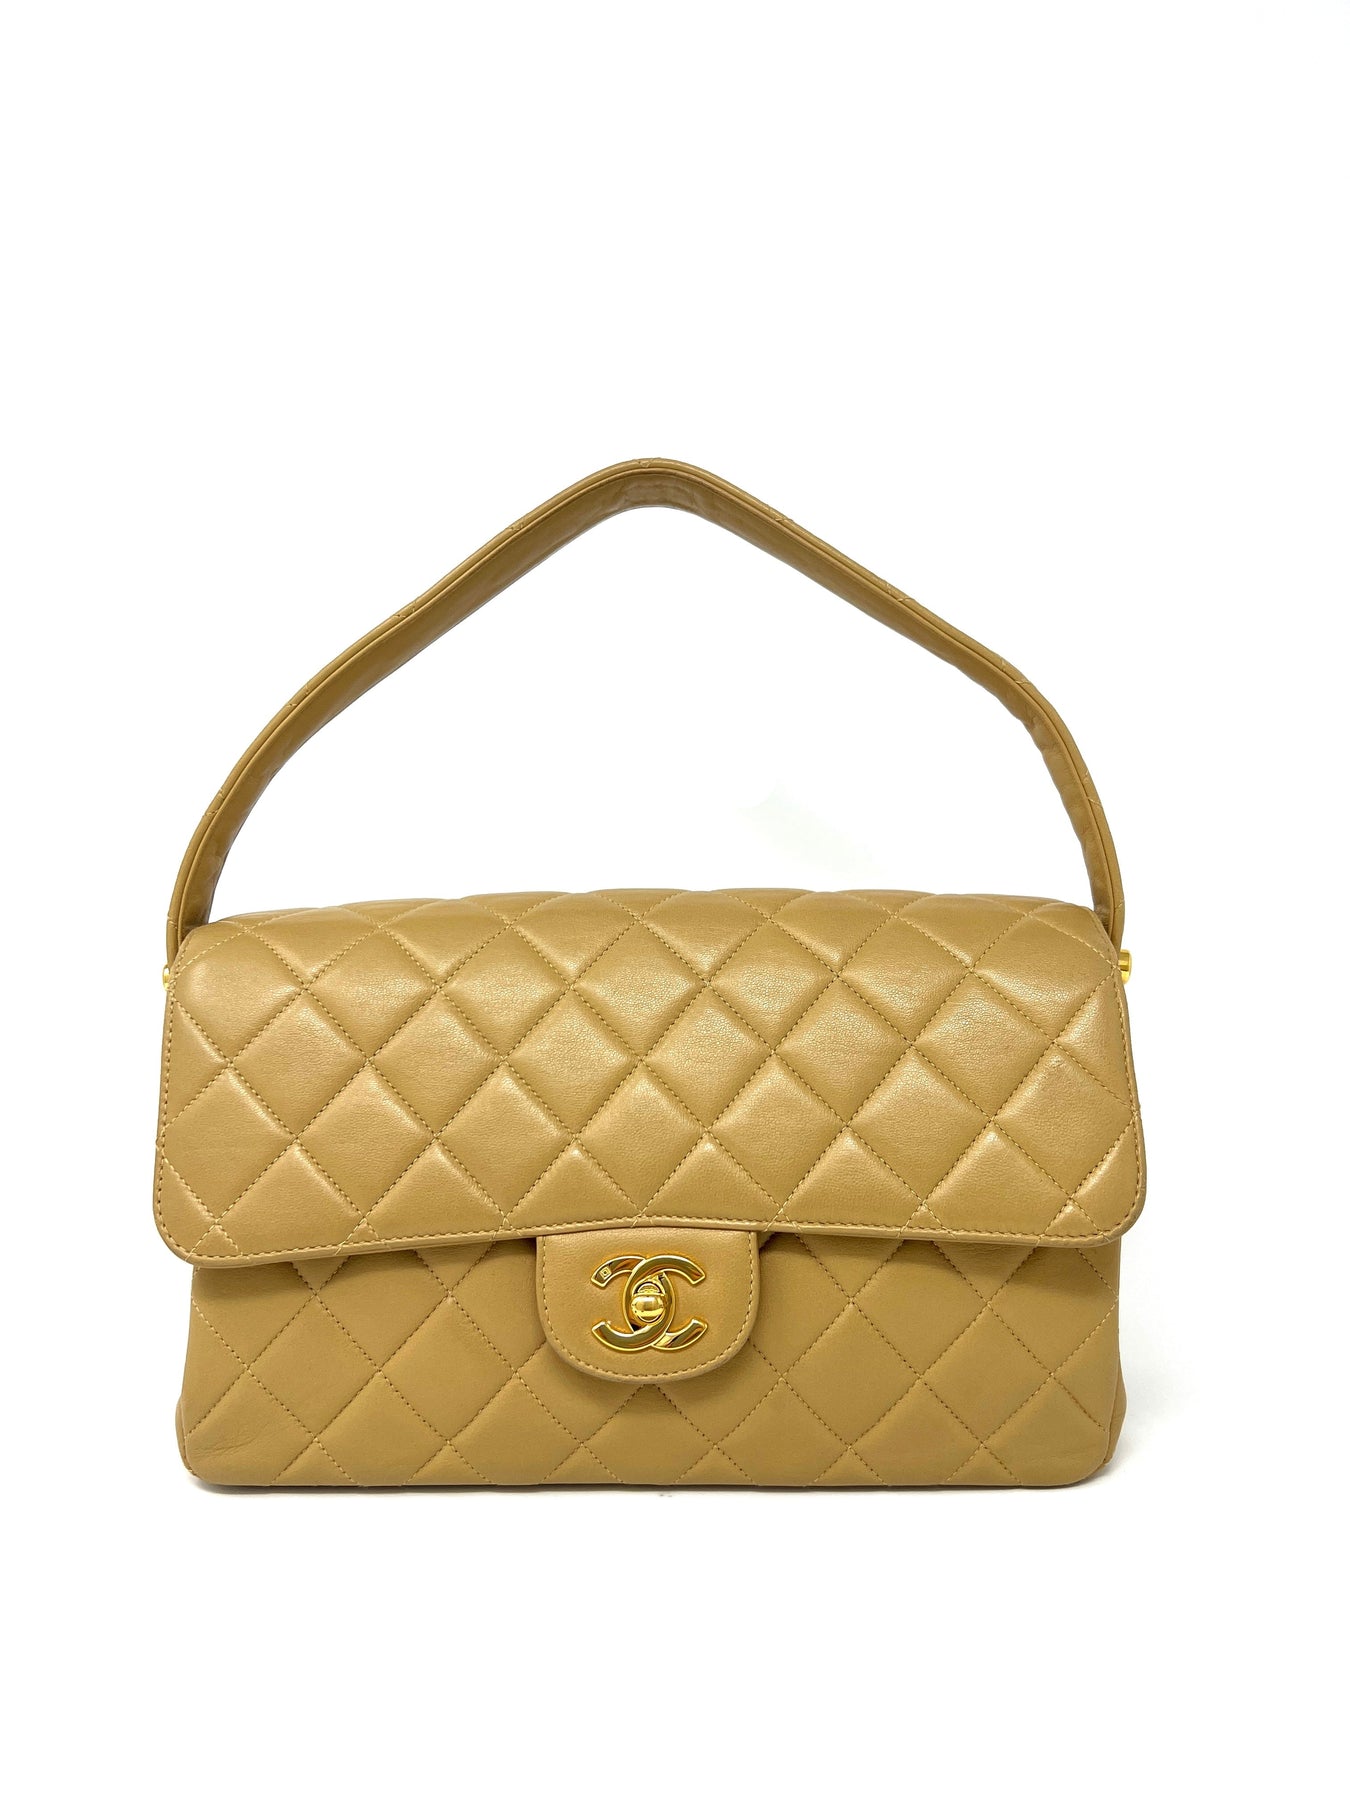 1996 Chanel Burnt Orange Quilted Lambskin Double Sided Small